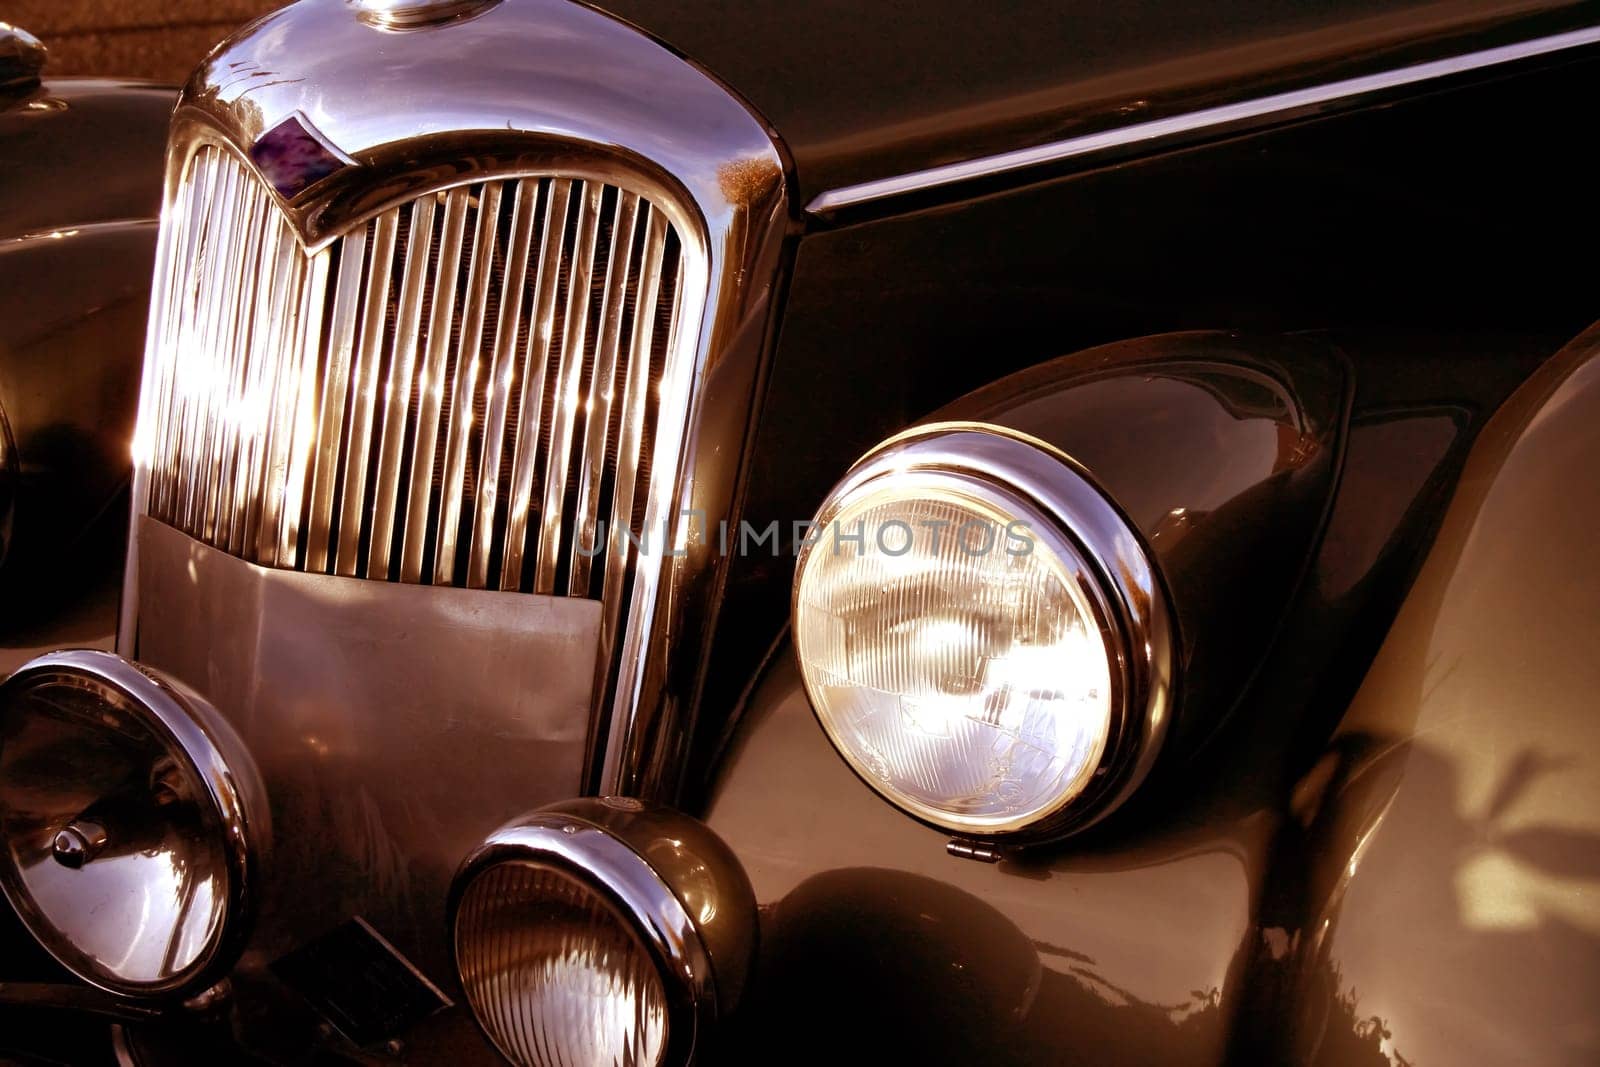 The front grill and headlight of the old beautiful car on the background copy space, card background by antoksena